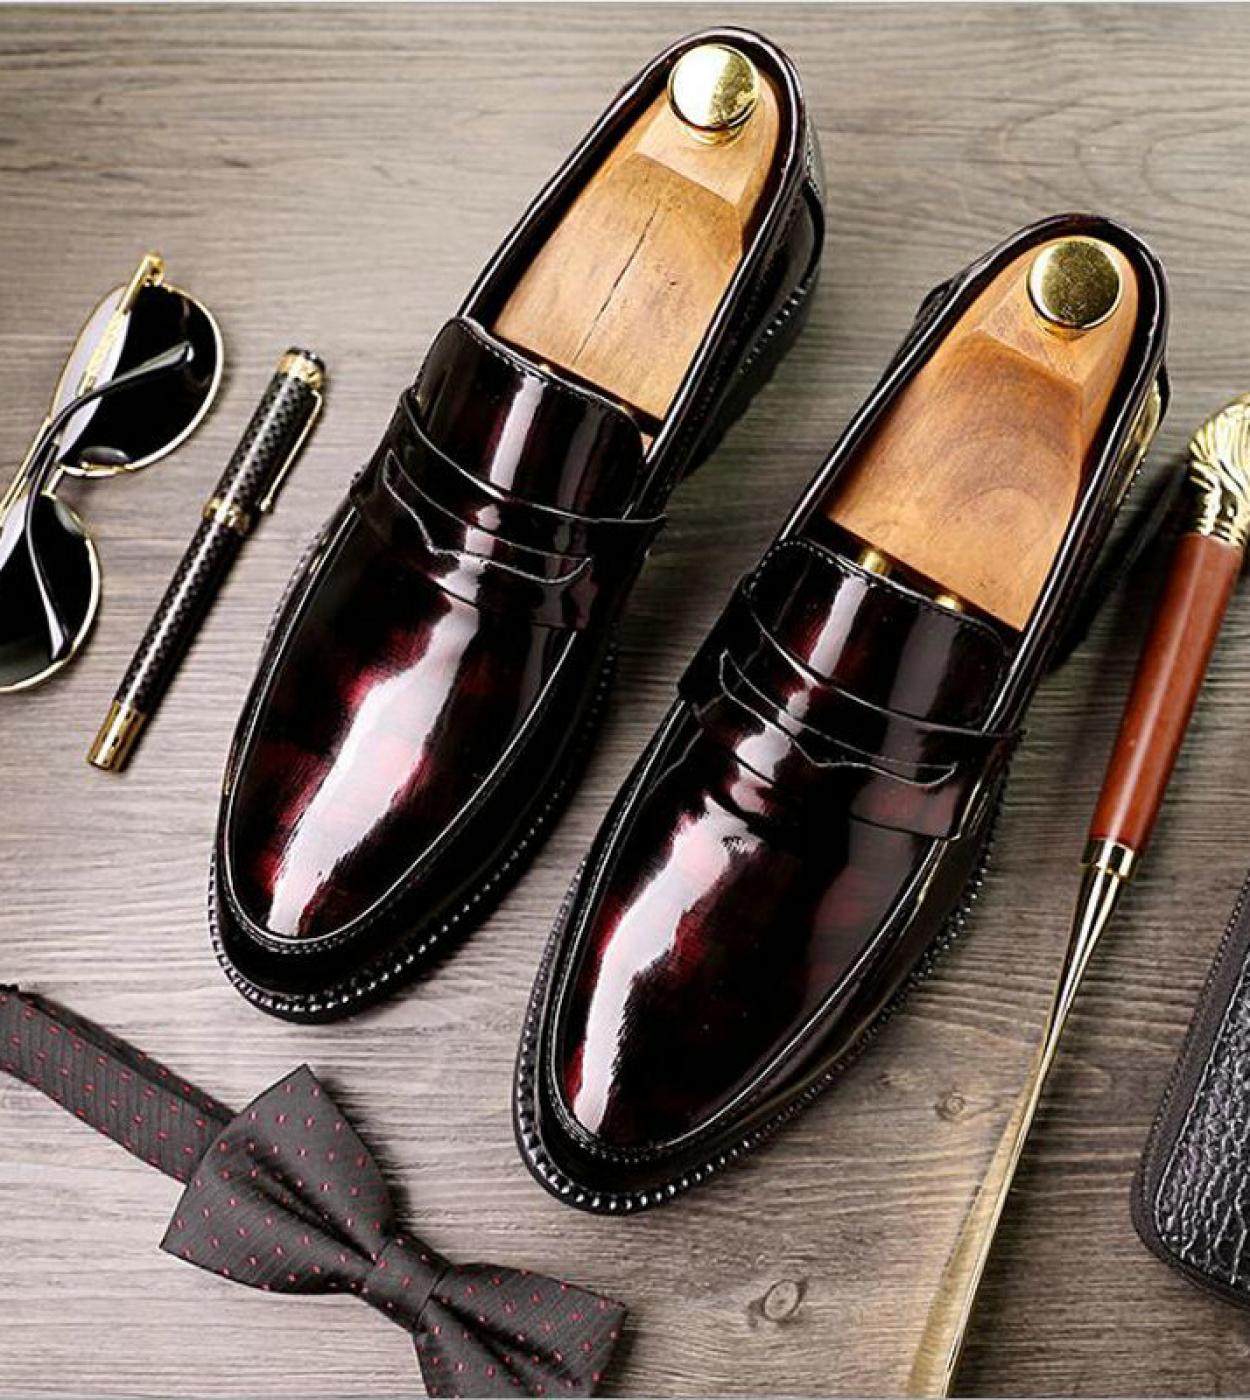 New Mens Loafers Leather Business Office Wedding Shoes Man Dress Shoes Wedding Moccasin Party Footwear Oxfords Shoes 96f